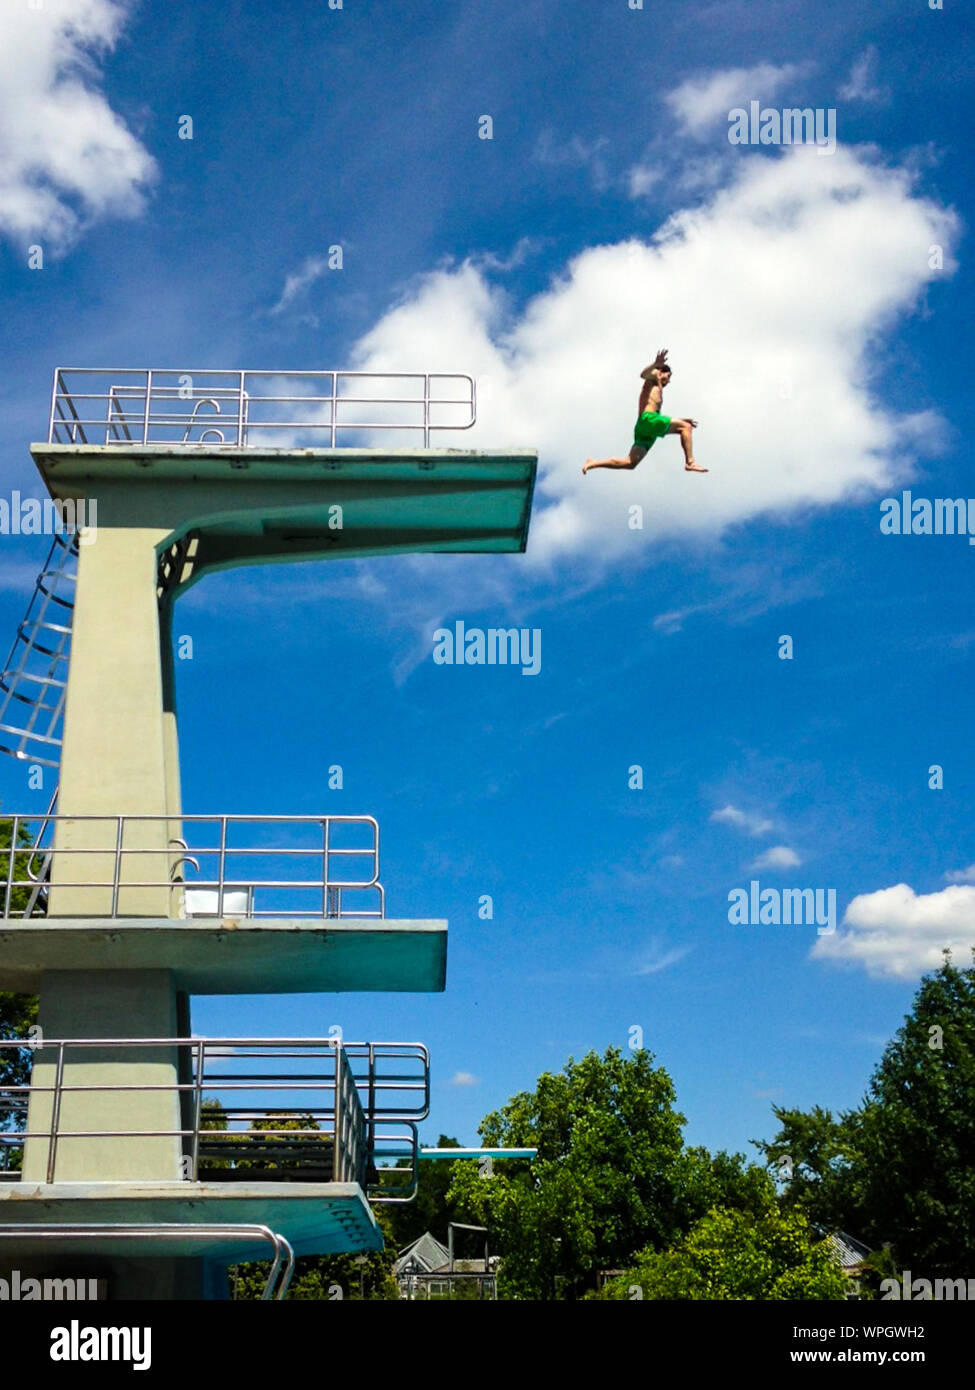 Man Jumping From A High Dive Platform Stock Photo - Alamy